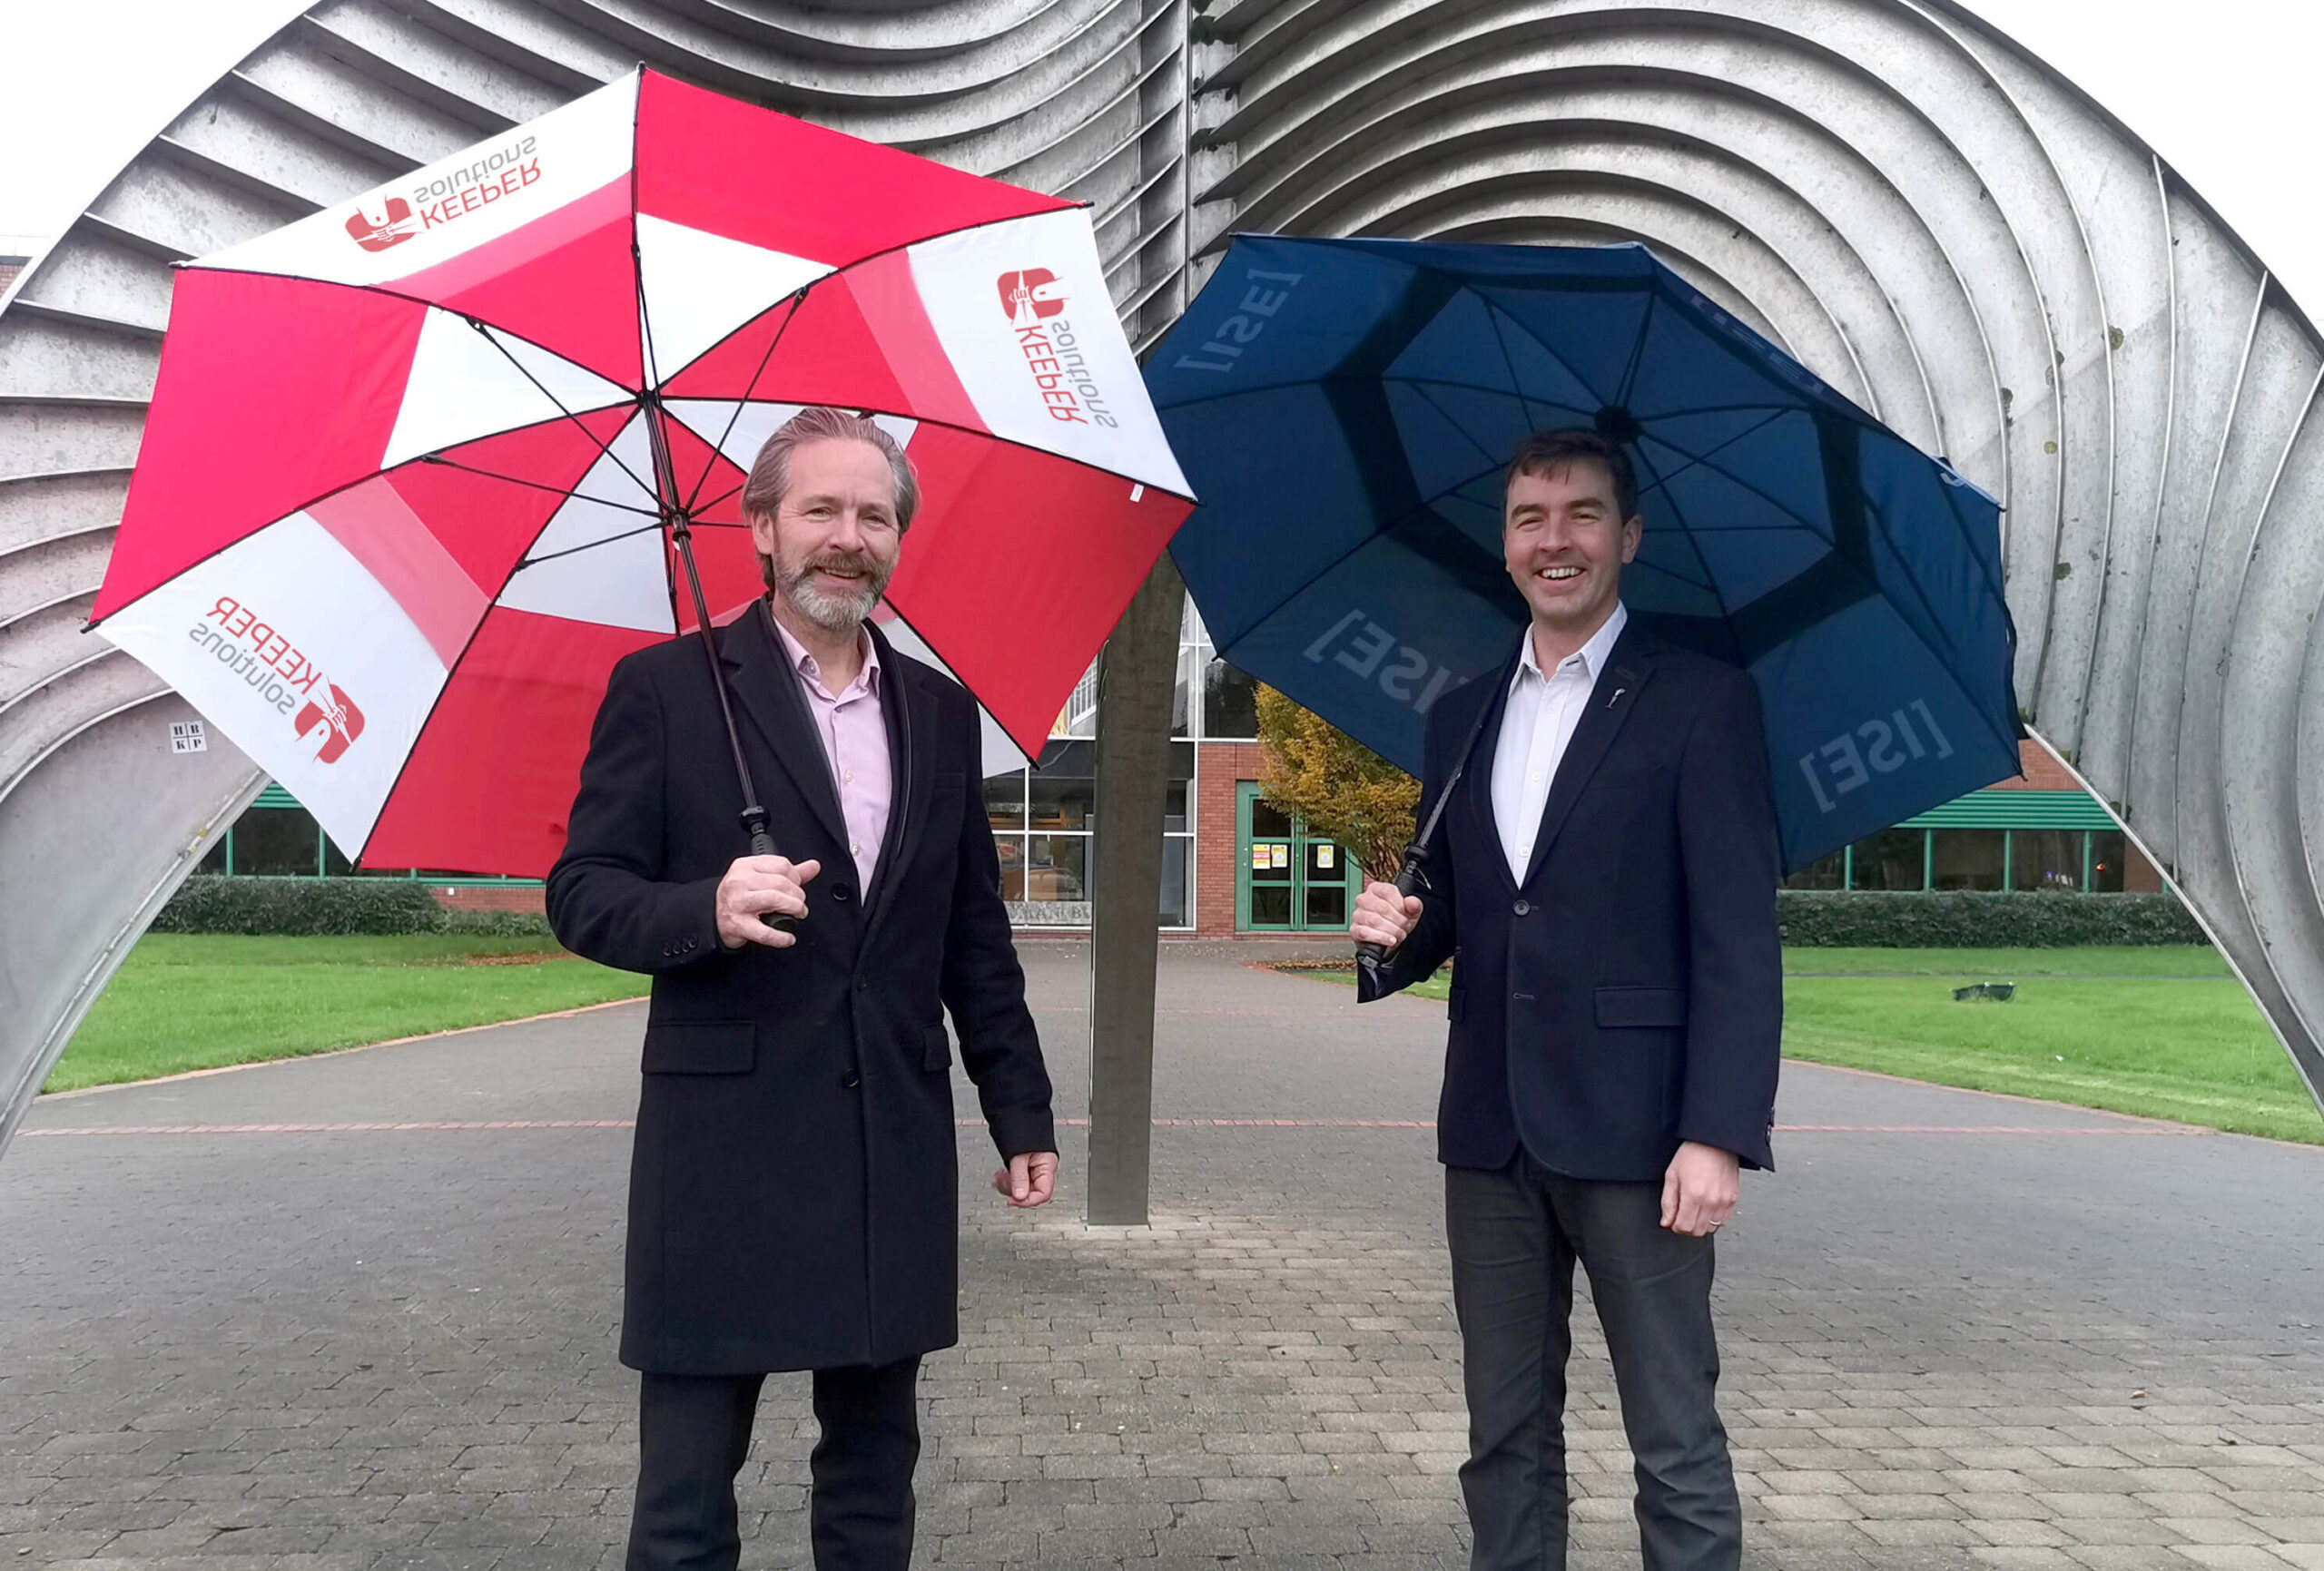 UL Immersive Software Engineering Programme - Stephen Walsh CEO and Founder of Keeper Solutions with Stephen Kinsella, Associate Professor of Economics at the University of Limerick